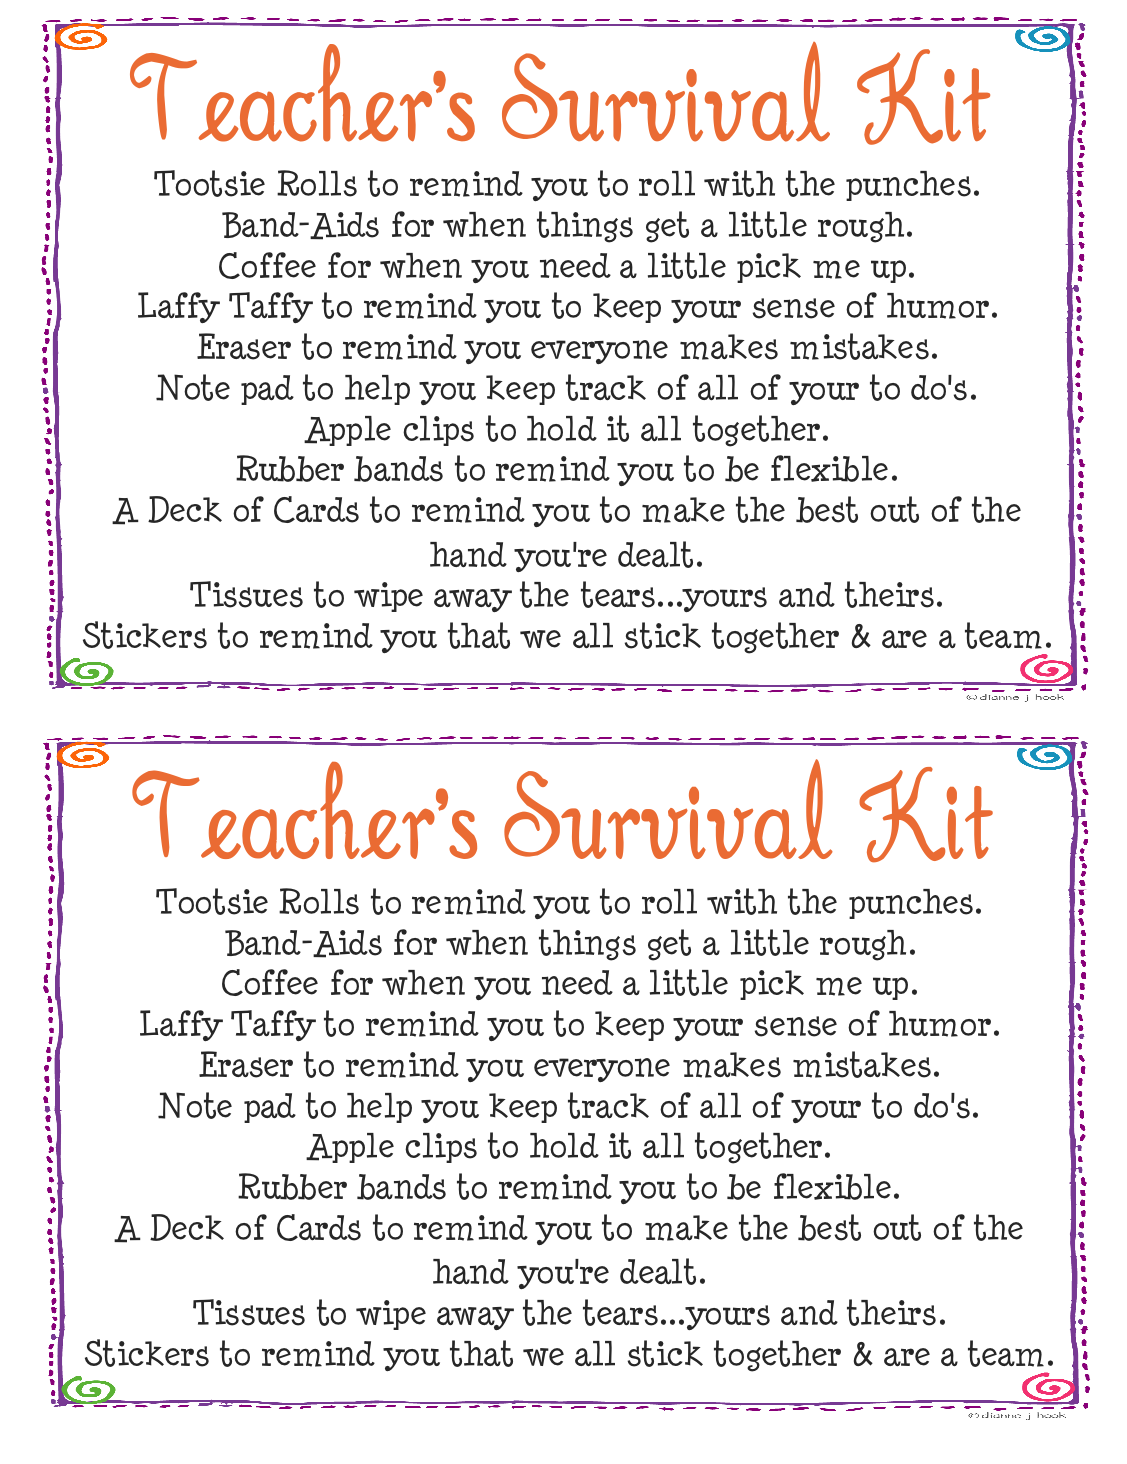 simply-made-with-love-teacher-s-survival-kit